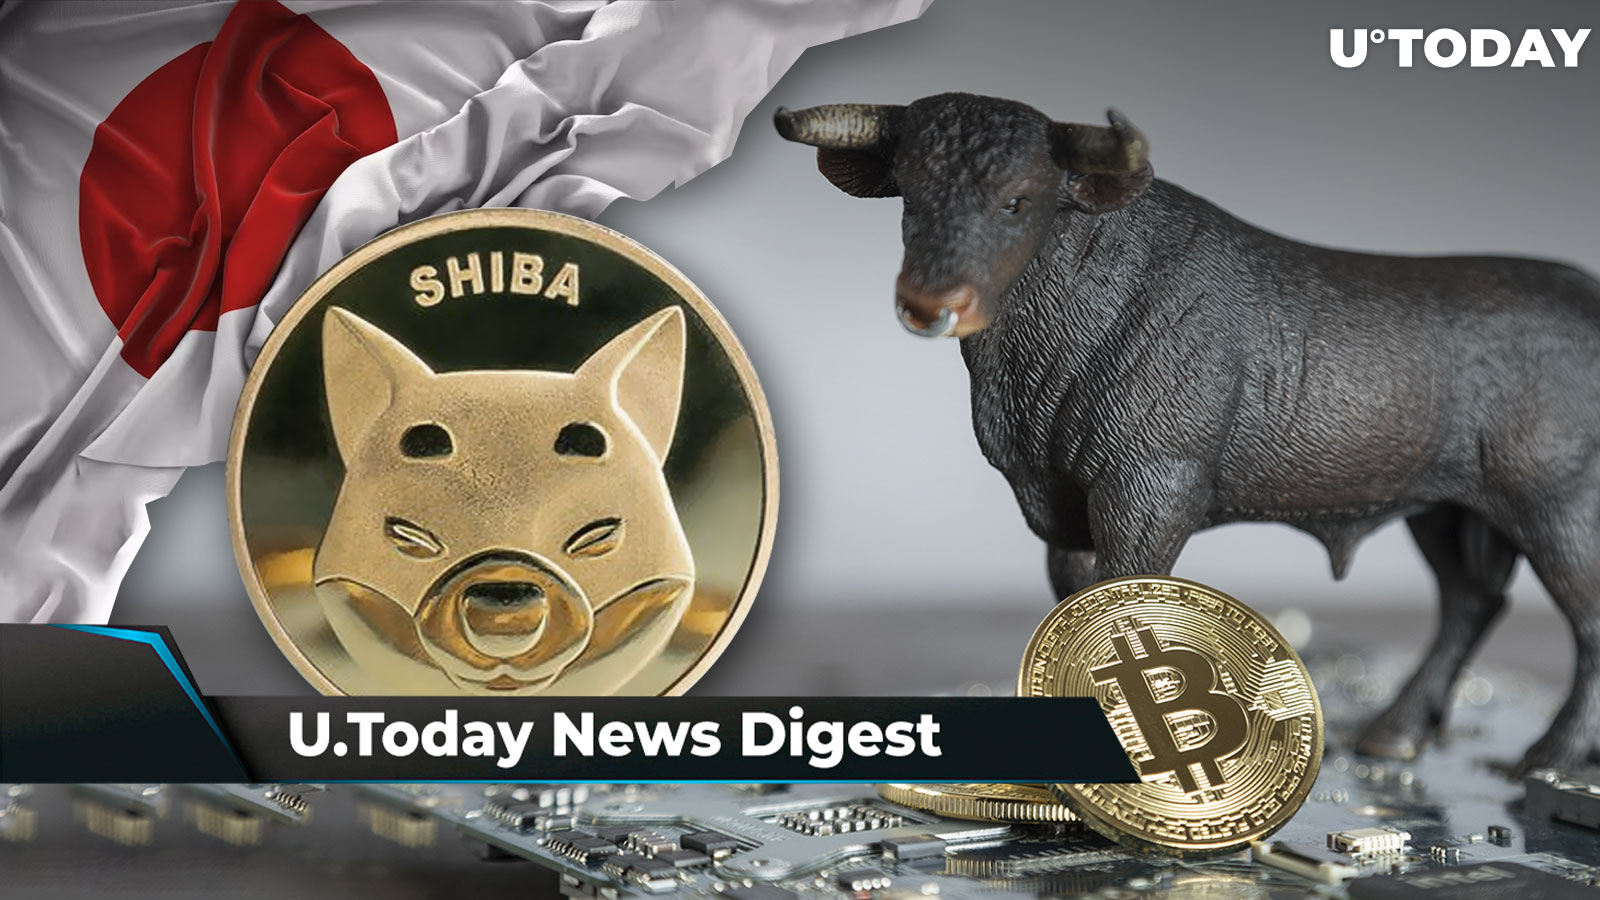 SHIB Listed on This Japanese Exchange, BTC Shows 9 Signs of Bull Run Per Analyst, 300 Billion SHIB Dumped in 24 Hours by Voyager: Crypto News Digest by U.Today